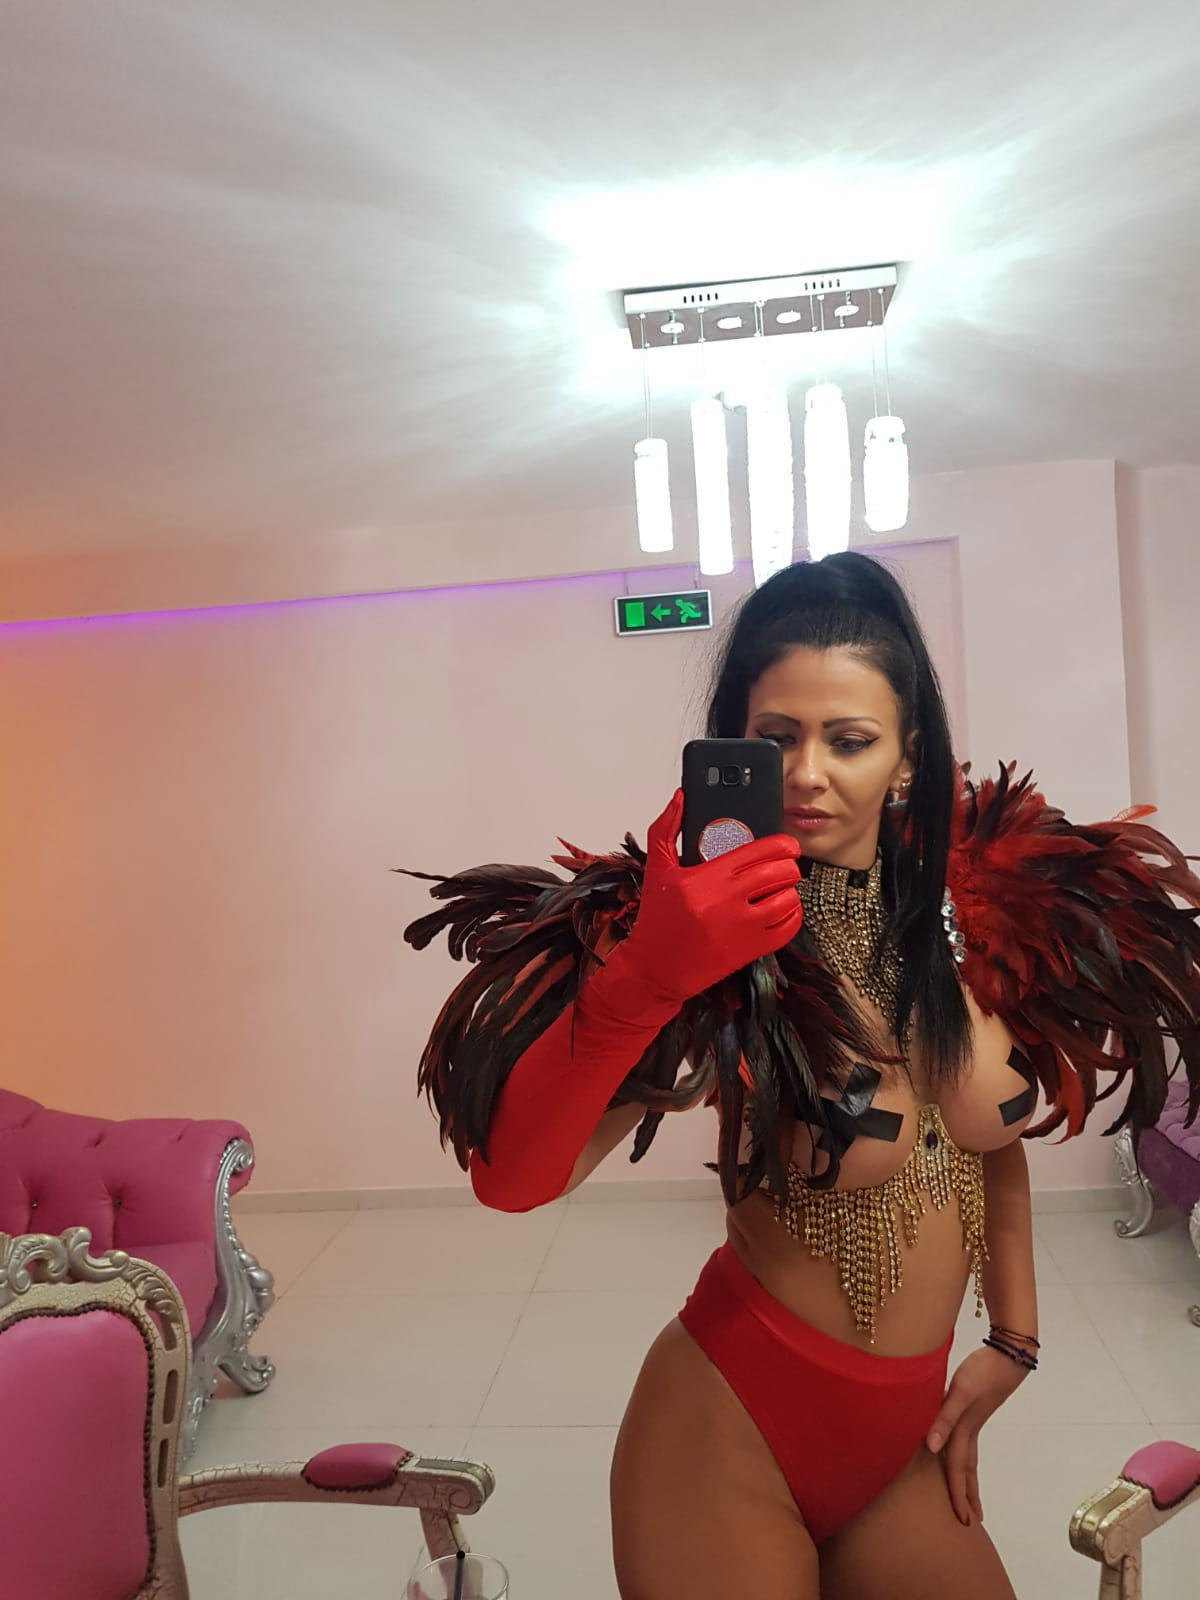 Watch the Photo by AliciaBonita with the username @AliciaBonita, who is a star user, posted on February 15, 2020 and the text says 'ready for tonight . doing what i love
#sharesomelove #cutie #stripper #work'